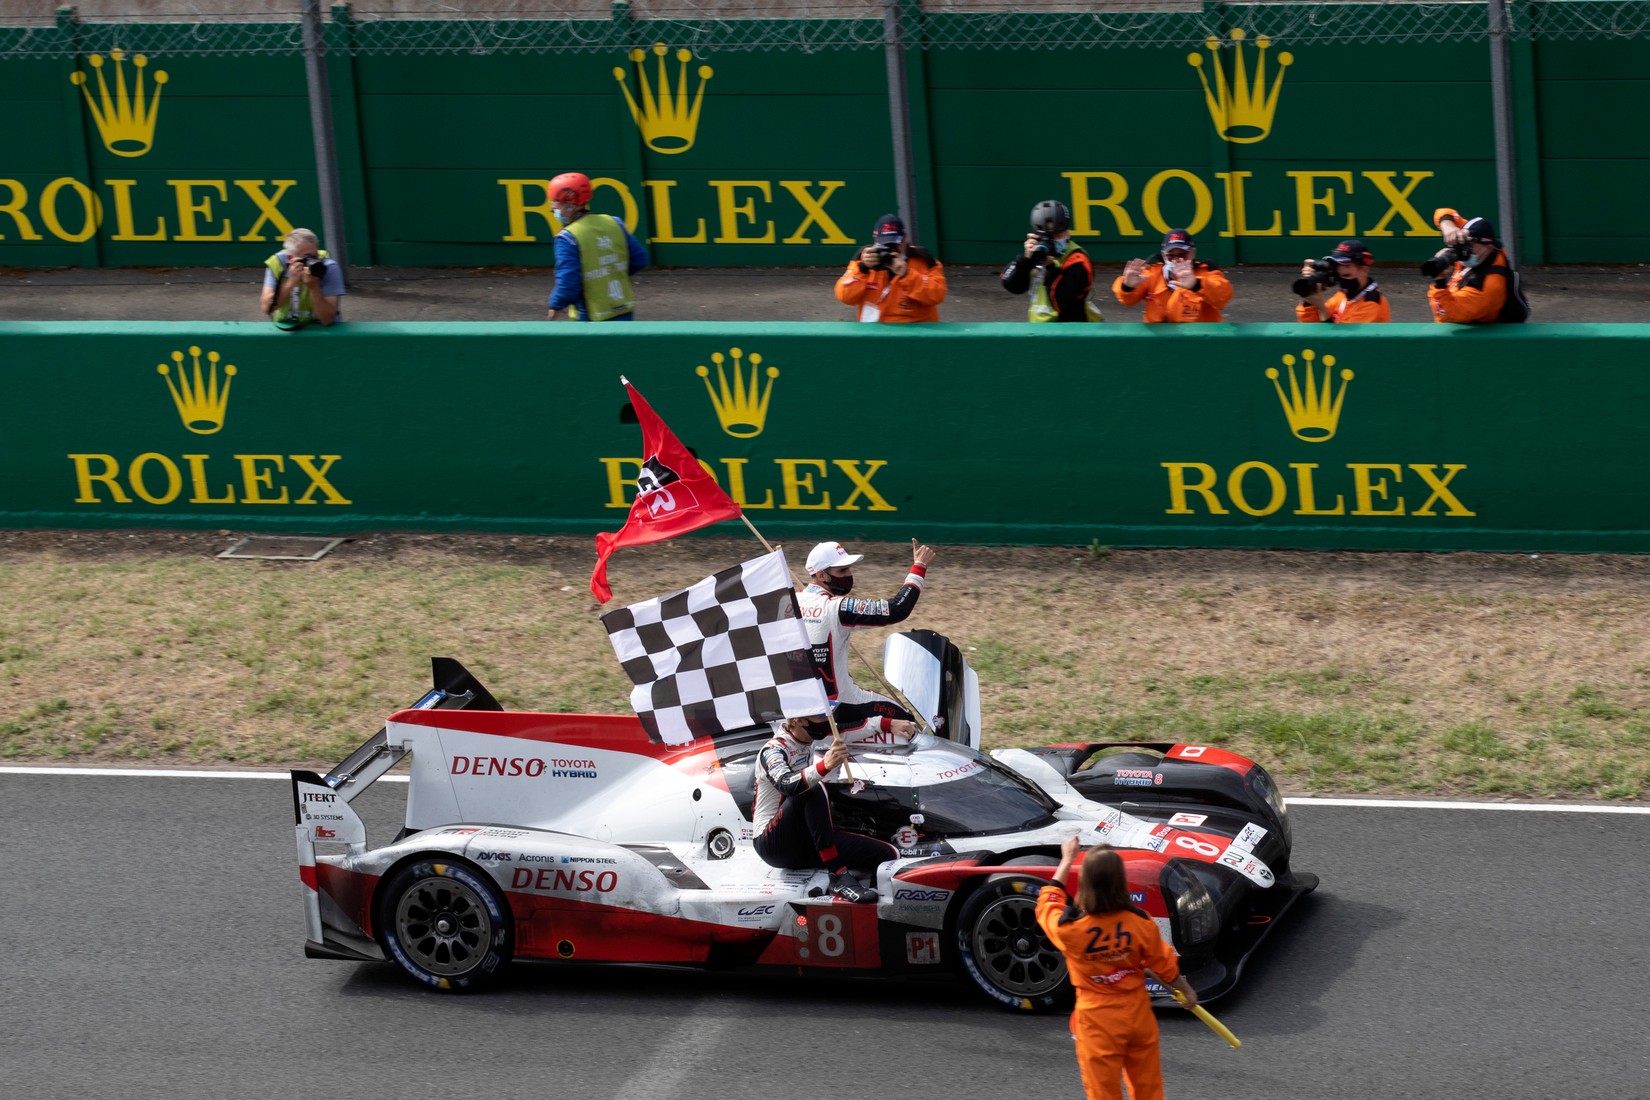 Rolex Motorsports Featuring the Hours of Le Mans | Calibre Magazine